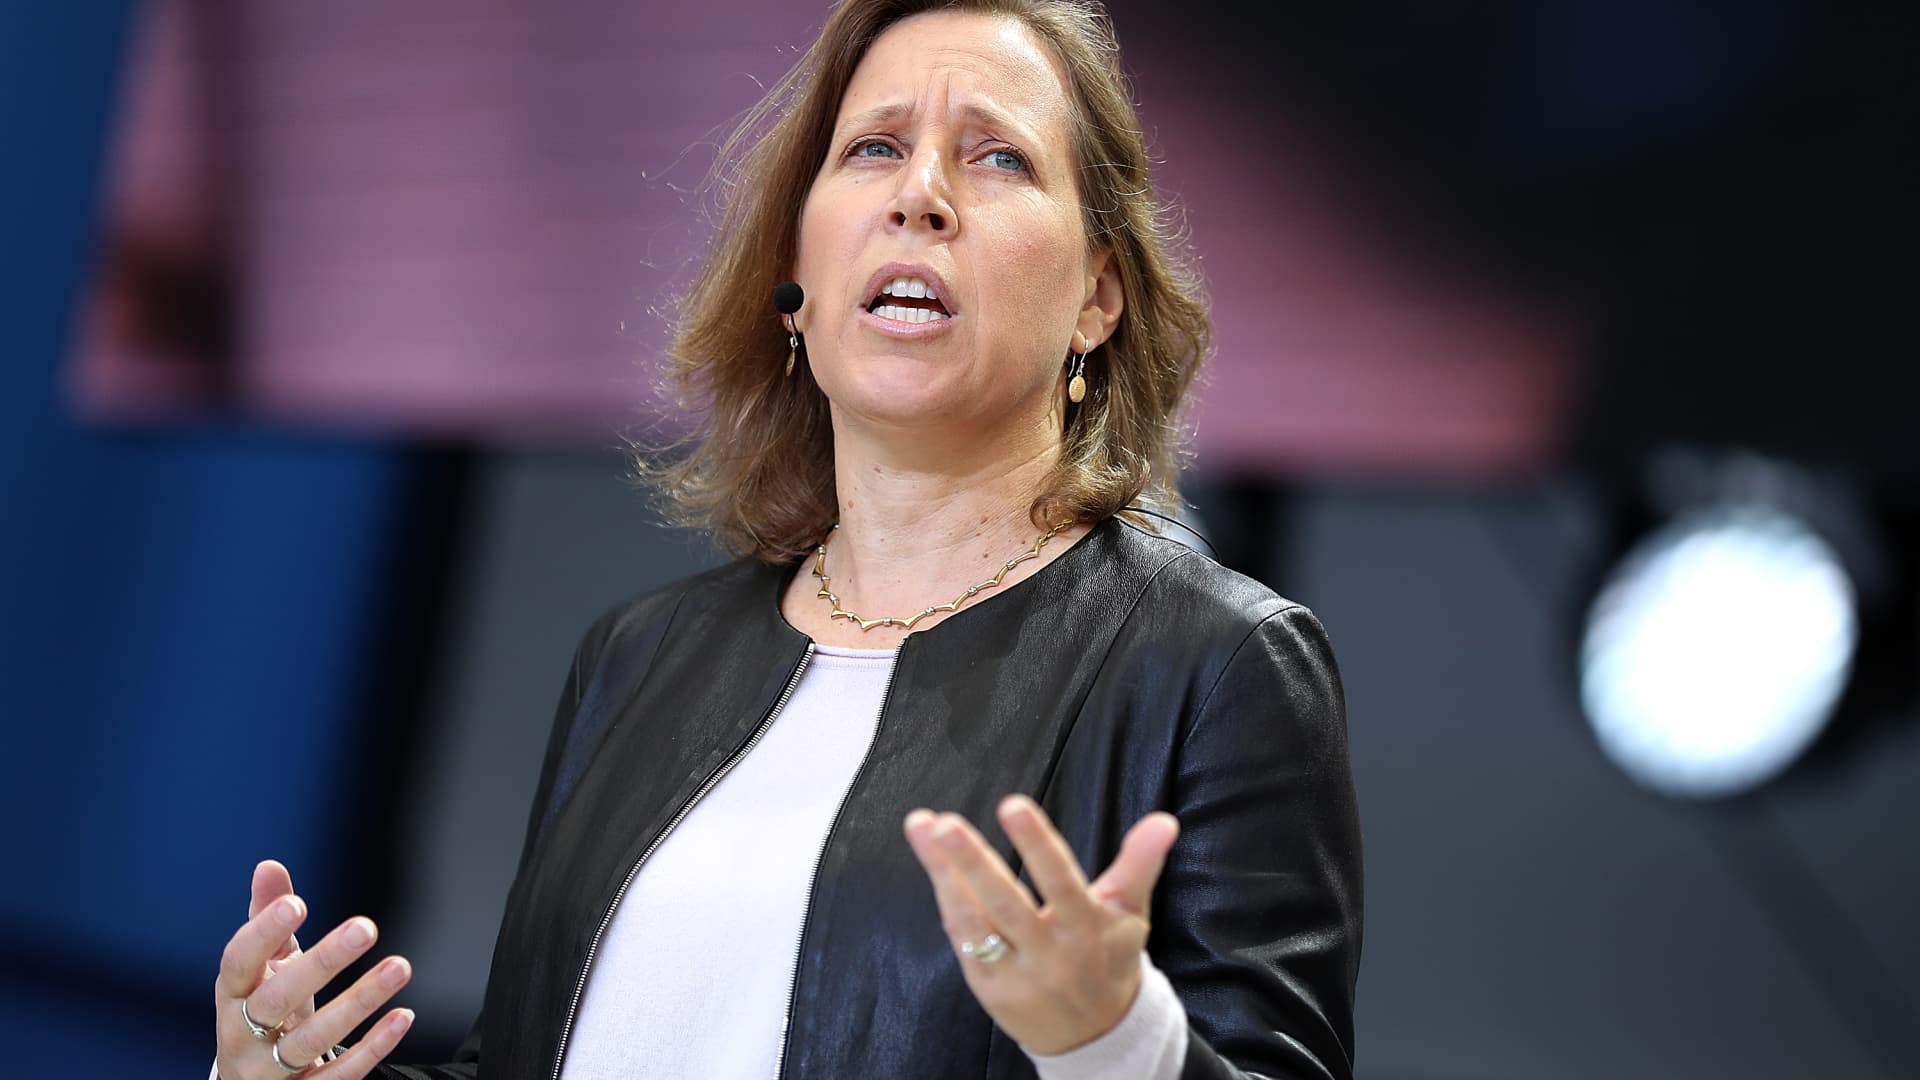 Susan Wojcicki was in talks to be Elon Musk’s quantity two at Tesla earlier than taking YouTube CEO position, e-book says